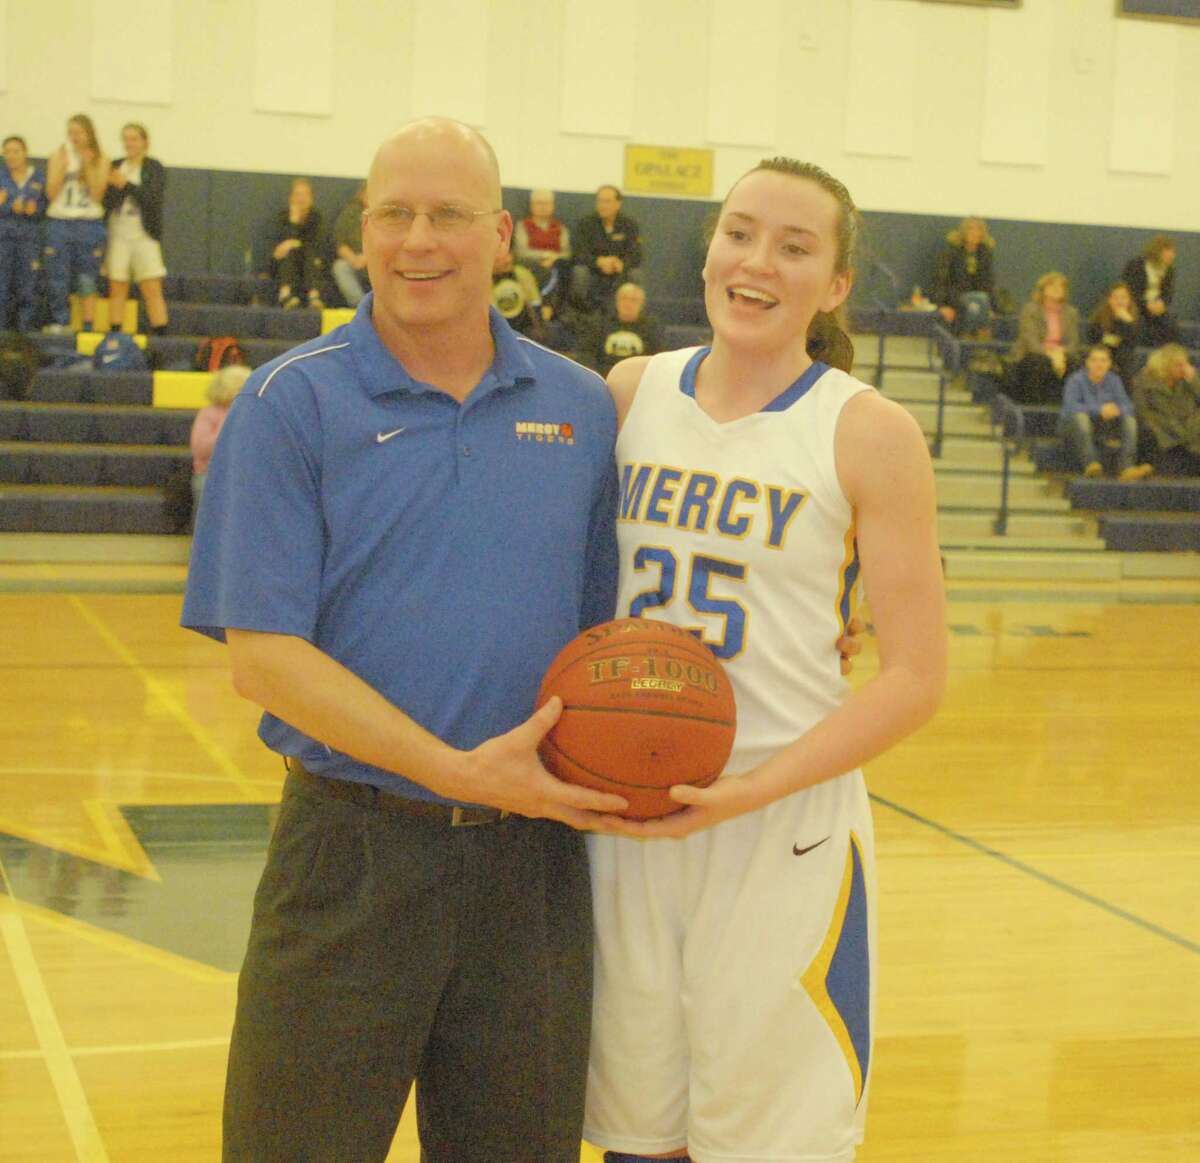 Mercy senior Maura Fitzpatrick, pictured with Tigers coach Tim Kohs, scored her 1,000th career point Thursday night in Mercy’s victory over Law. Photo: Jimmy Zanor